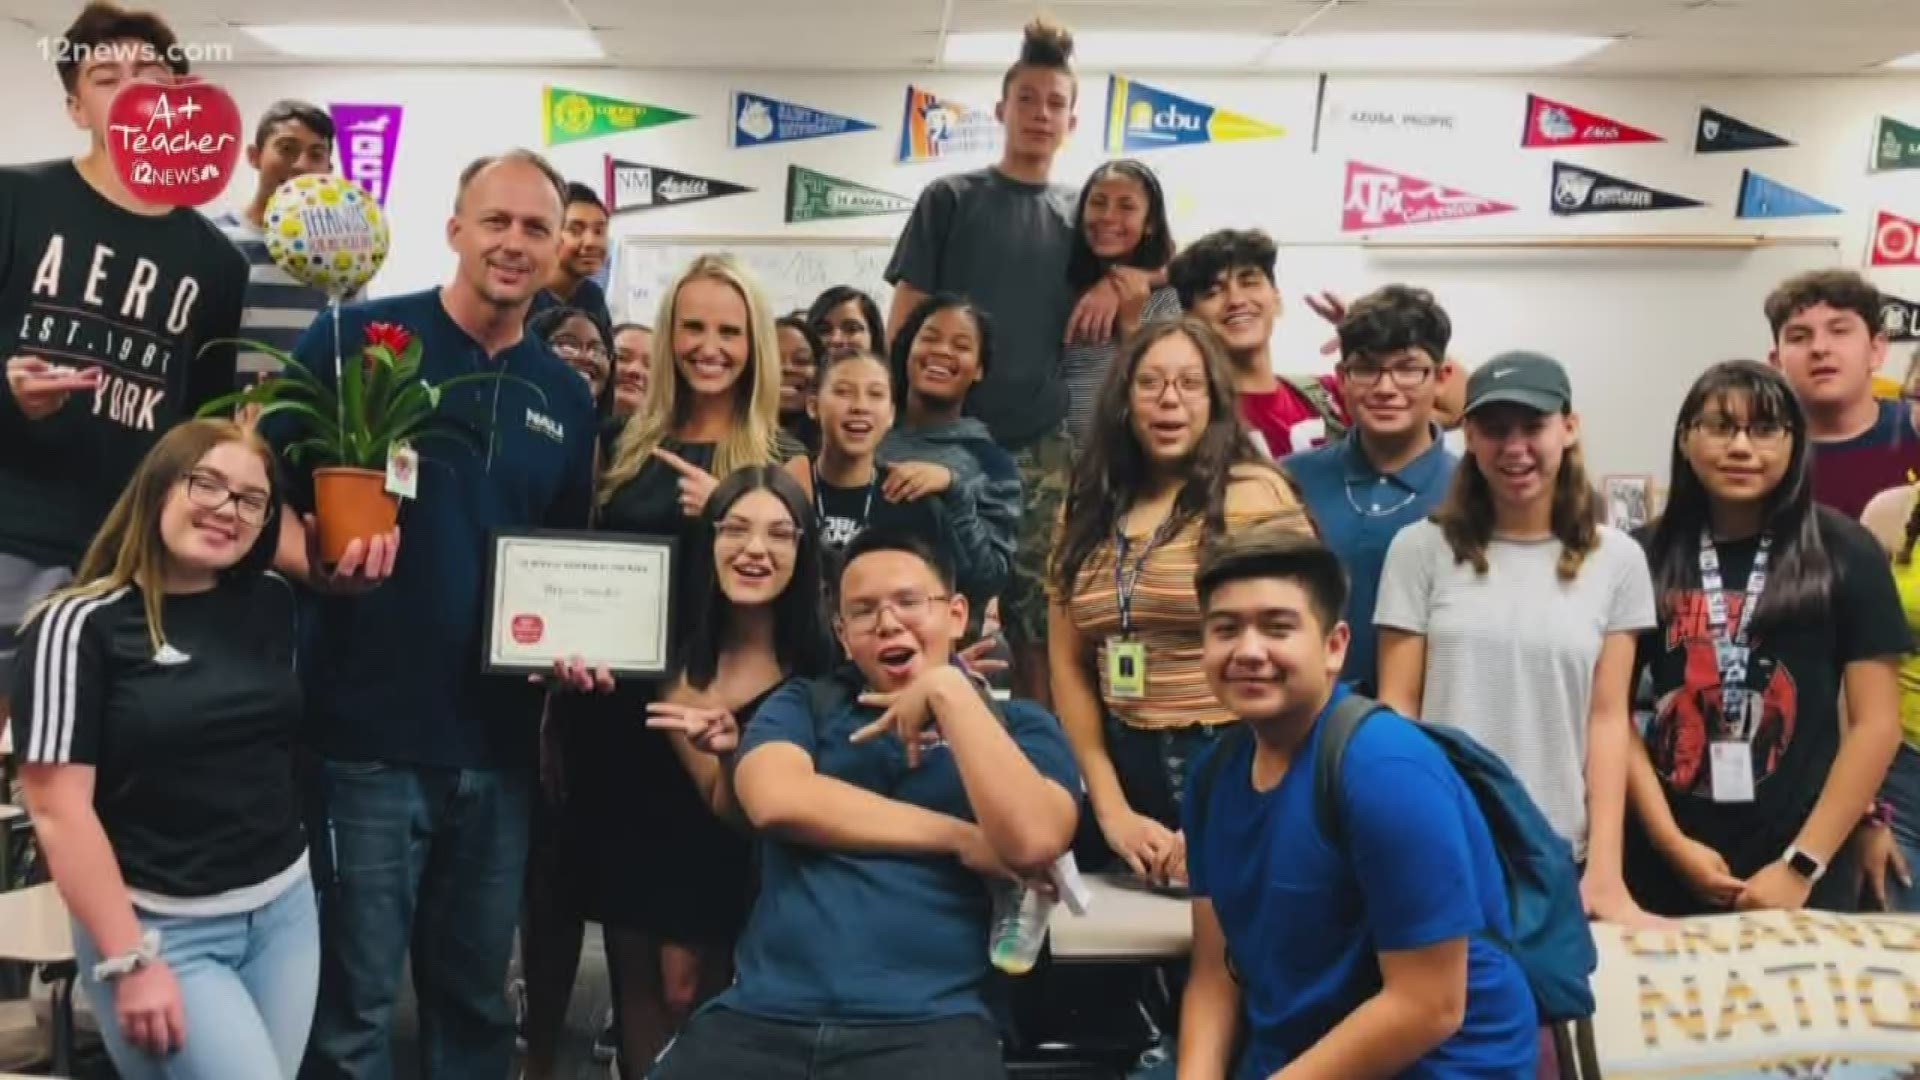 Bryan Snyder is a beloved English teacher and coach. Trisha Hendricks shares why he's the 12 News A+ Teacher of the Week.